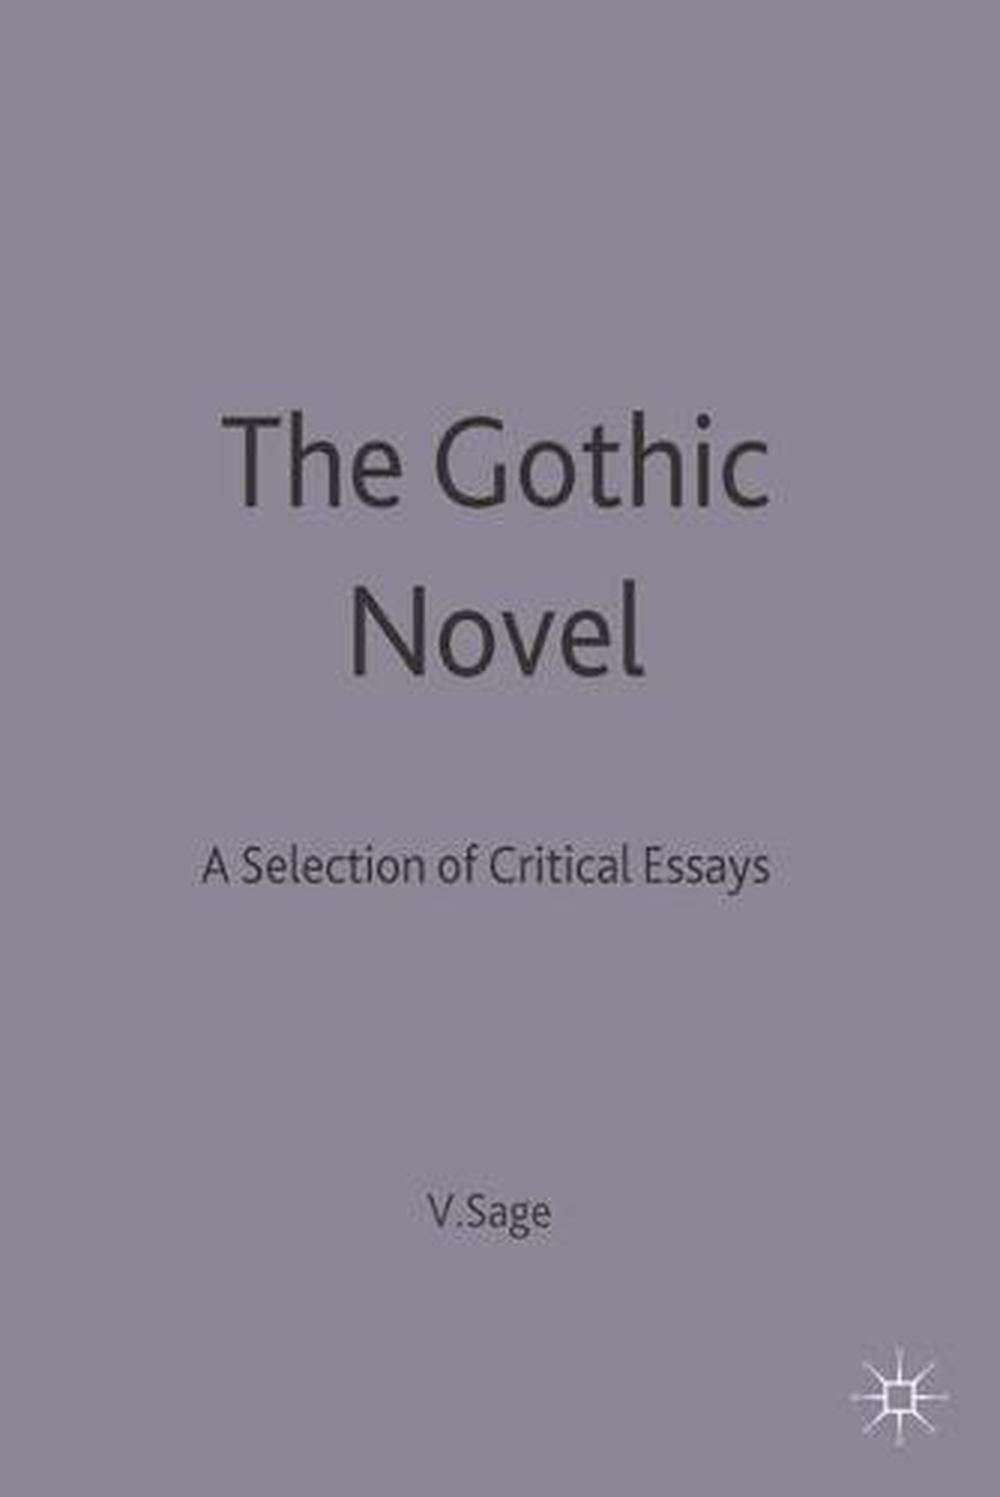 The Gothic Novel, 1790-1830 by Ann Blaisdell Tracy